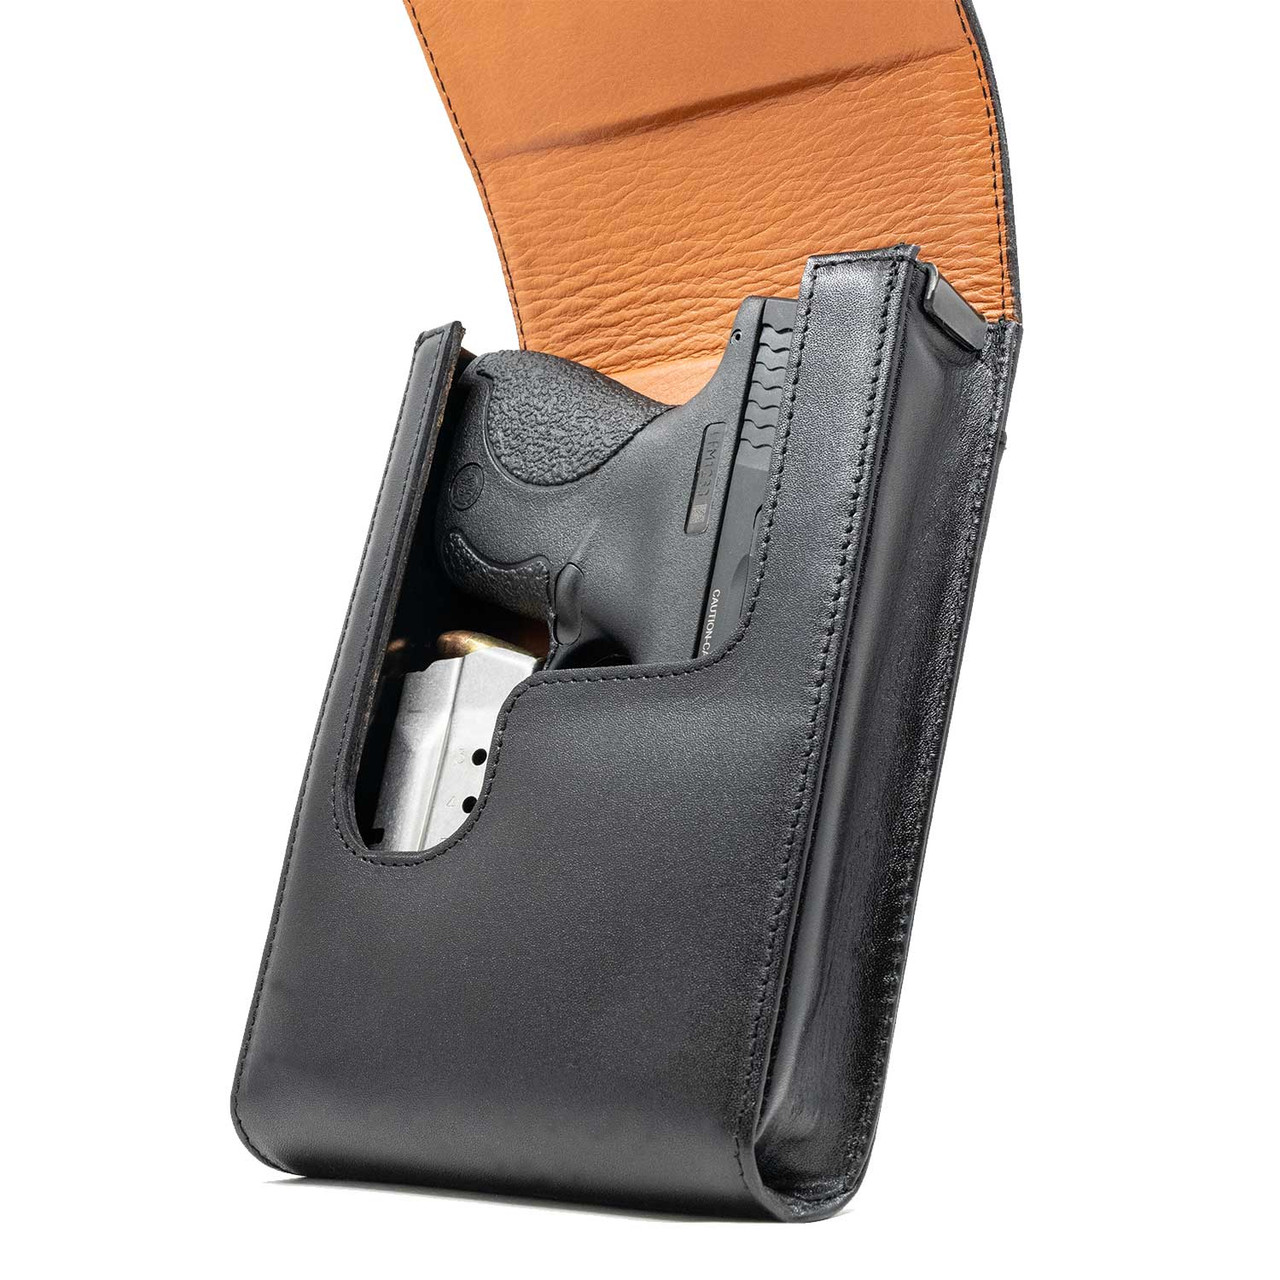 The Keltec P32 Xtra Mag Black Leather Holster